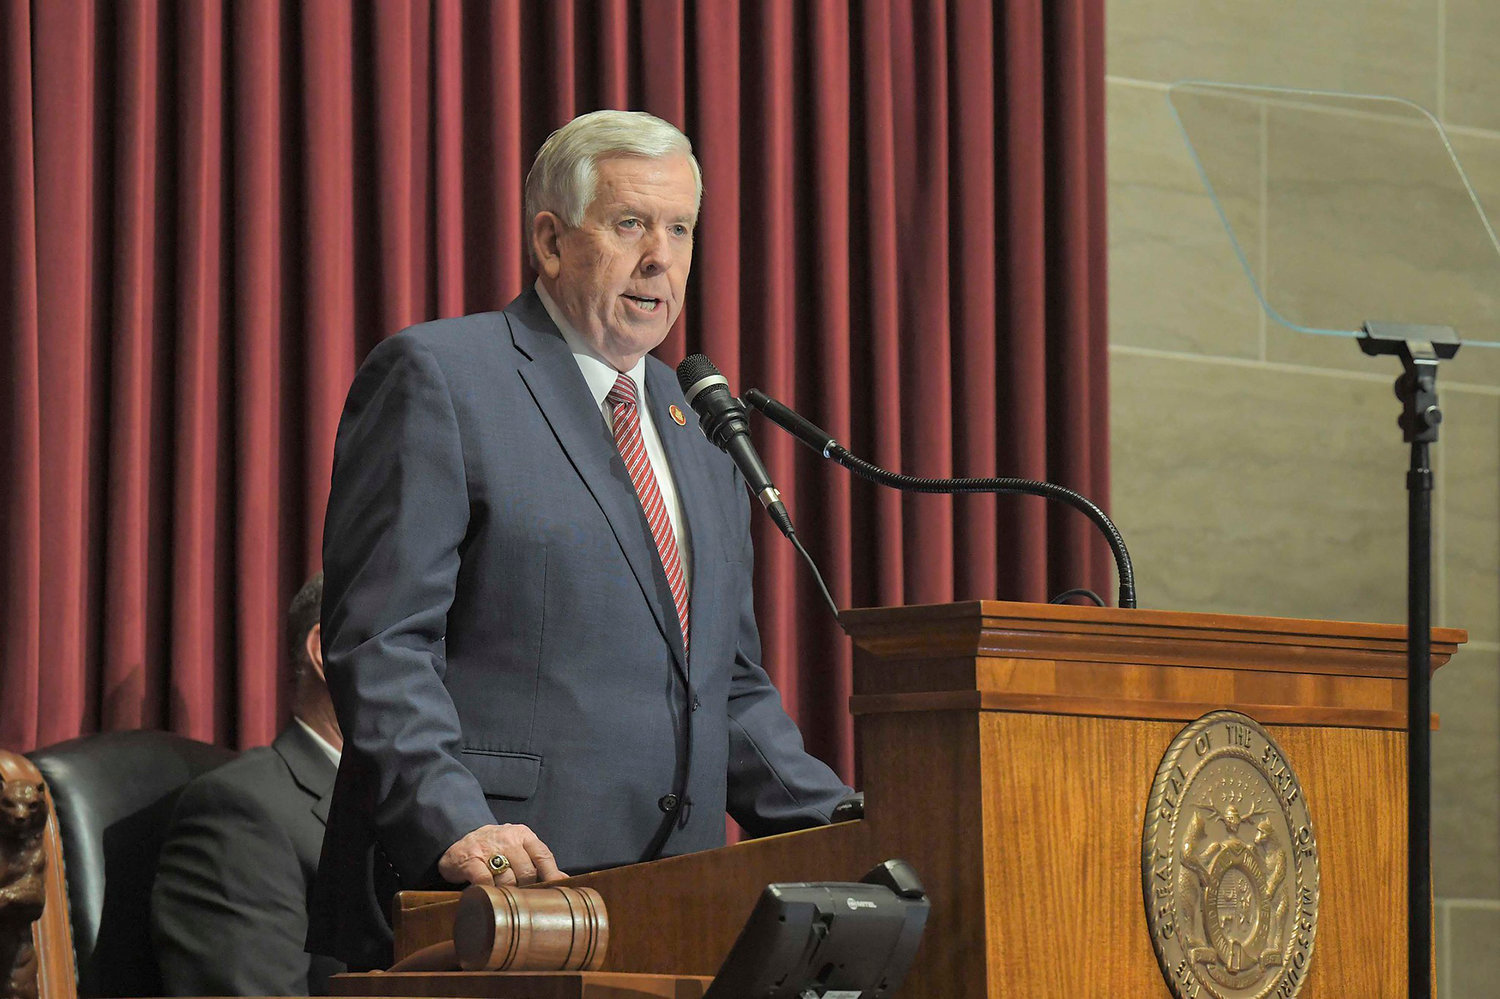 Governor Mike Parson delivers his 2023 "State of the State" address to the Missouri Legislature on Jan. 18. Included as a top priority in that address was a proposal to expand I-70 from Wentzville to Warrenton.